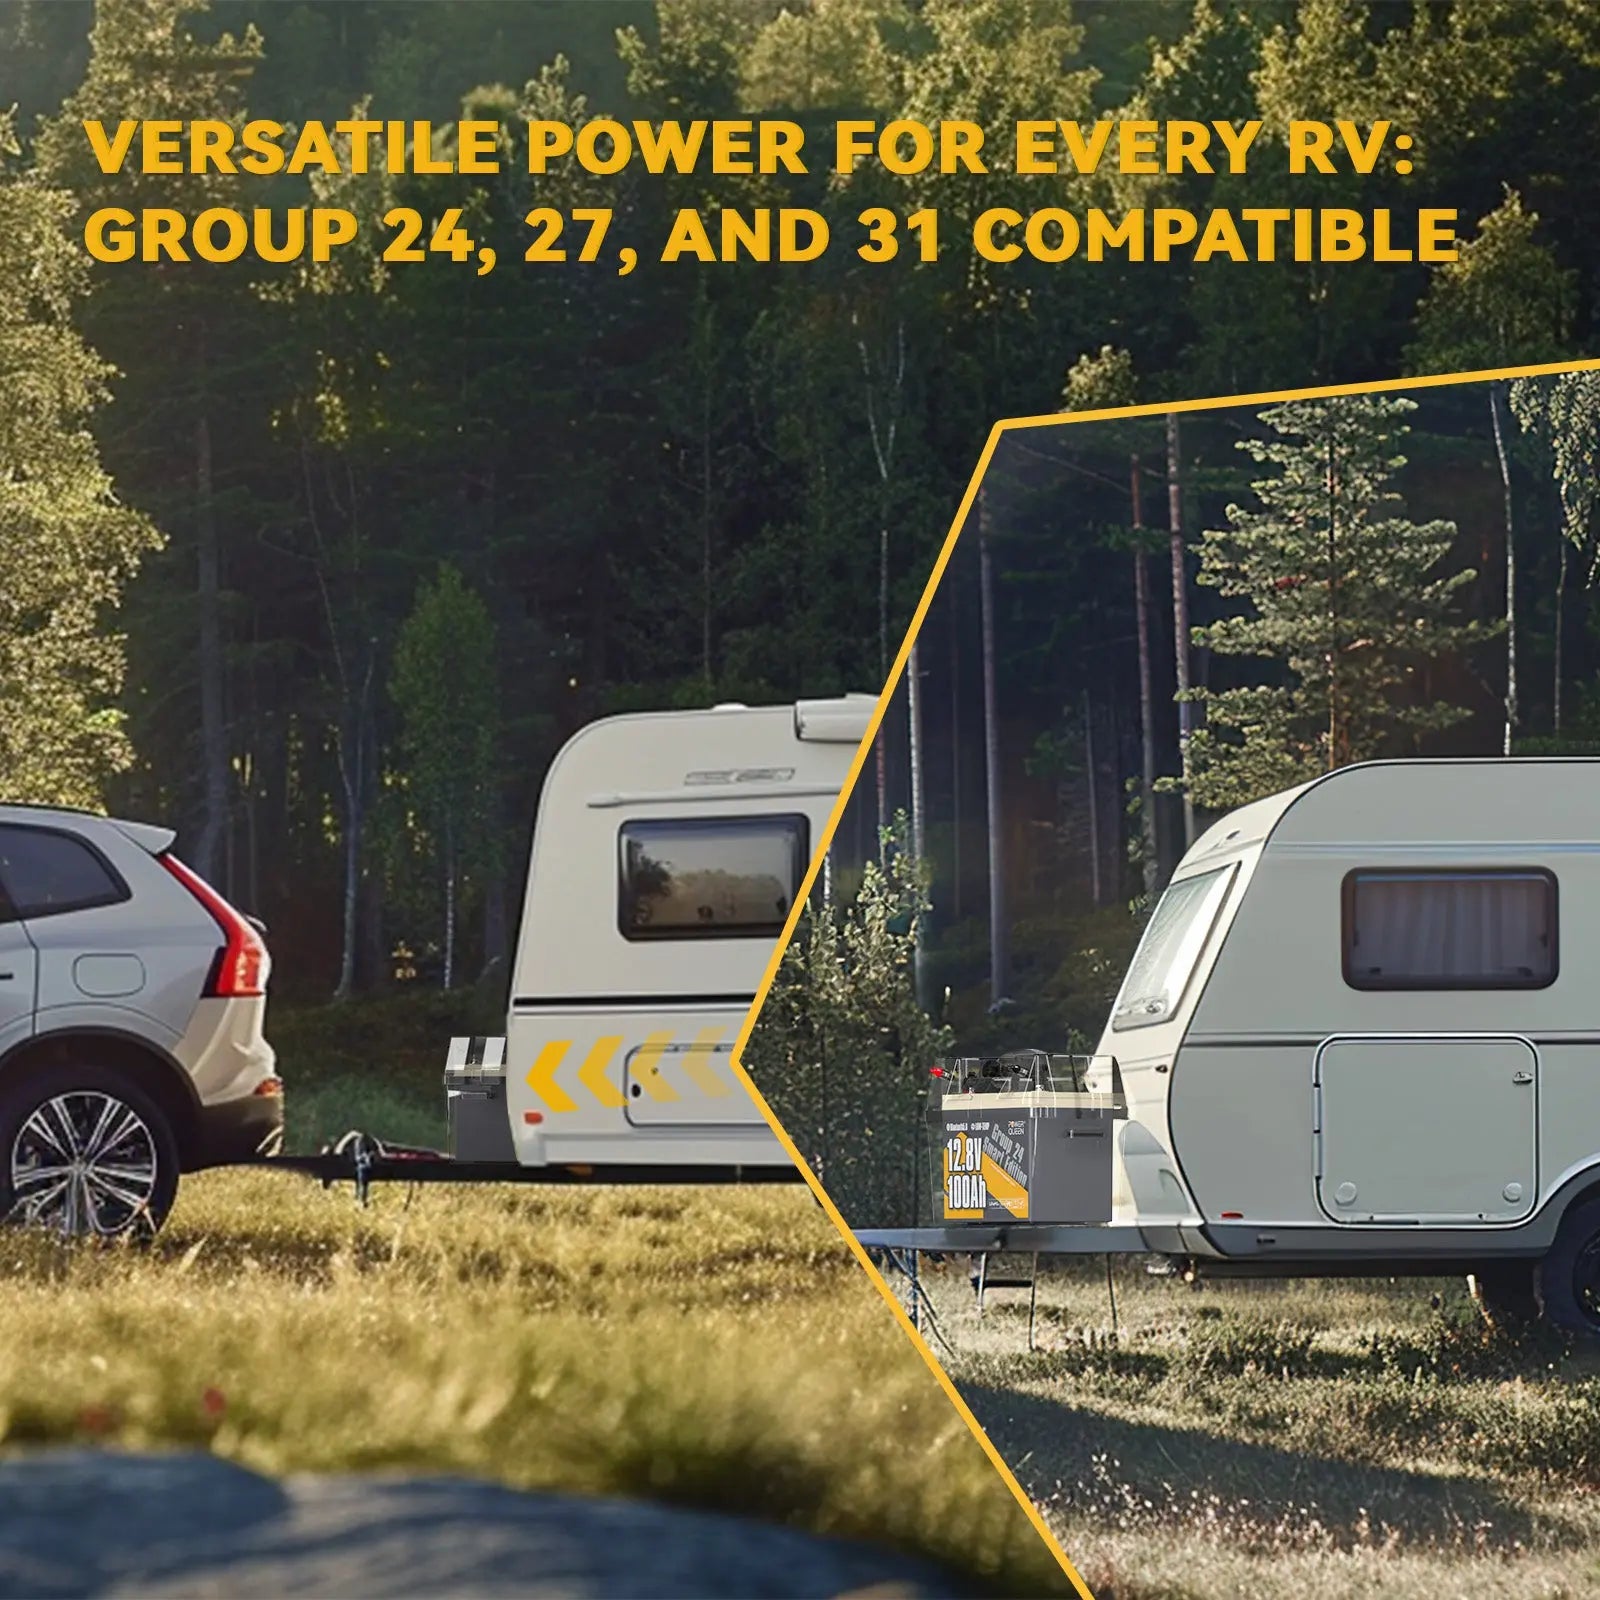 lithium battery versatile power for every rv group 24,27 and 31 compatible